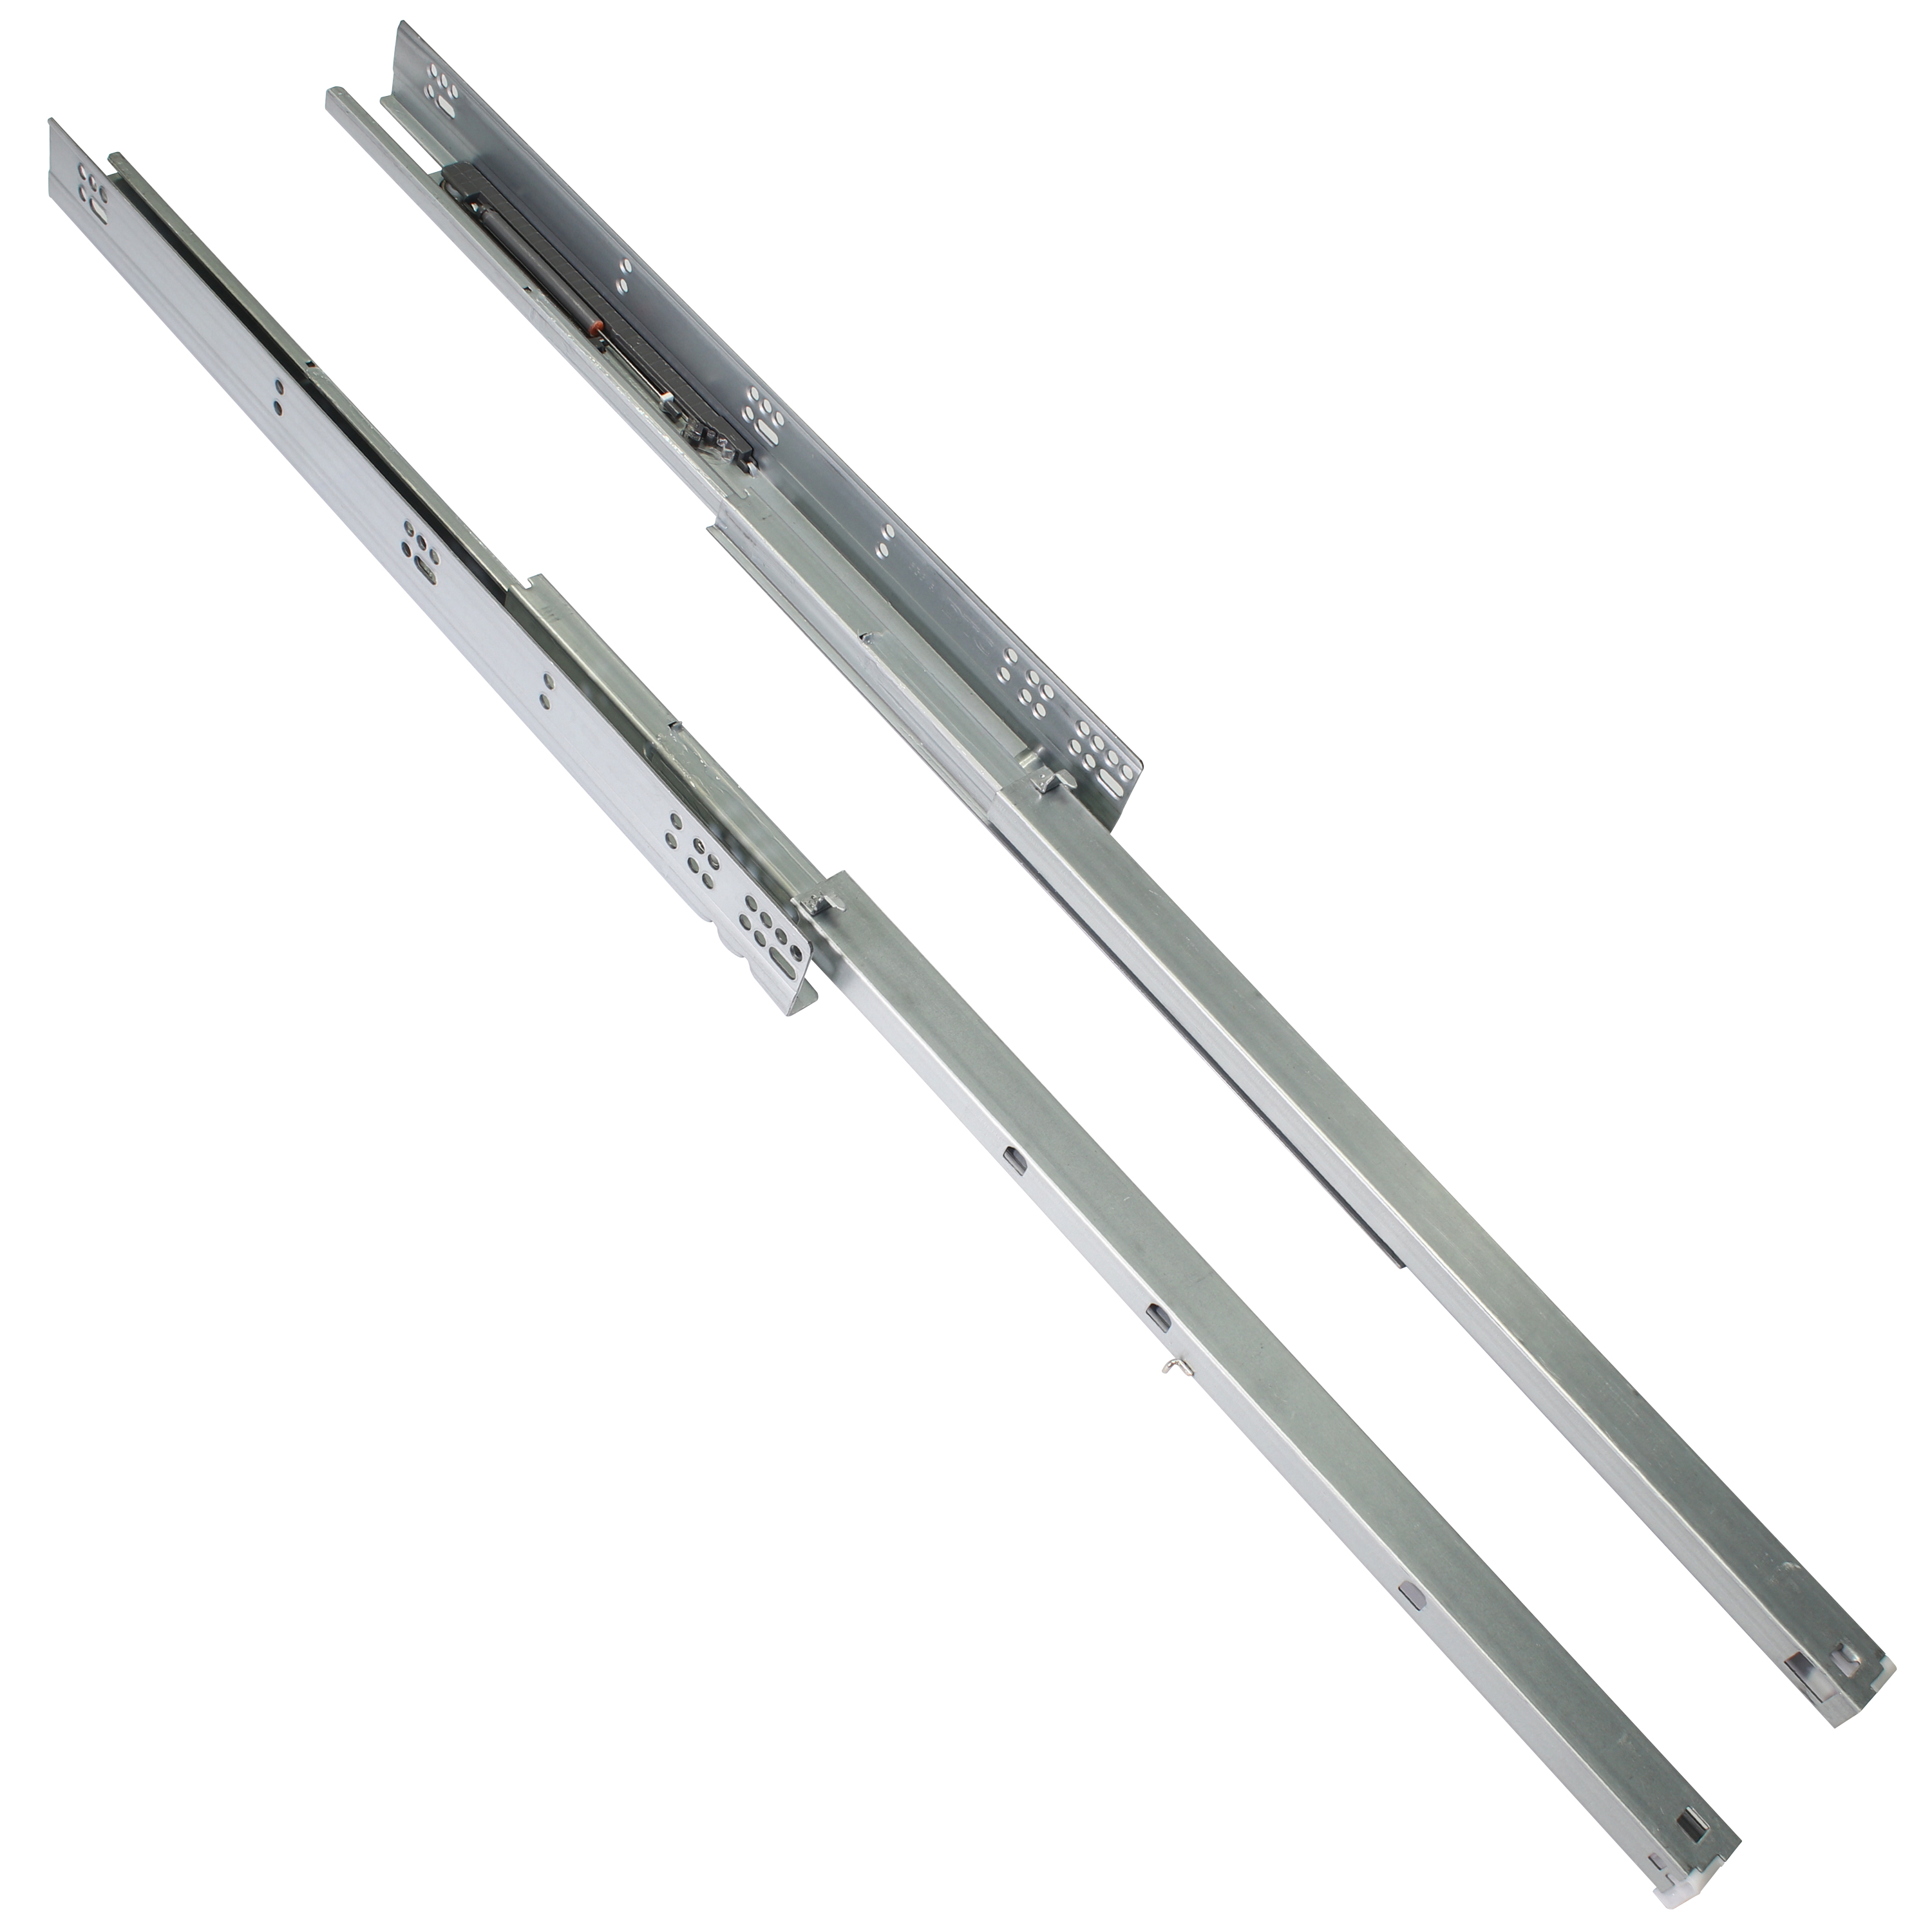 Pair of DTC 21" Undermount Drawer Slides, Full Extension, SoftClose eBay